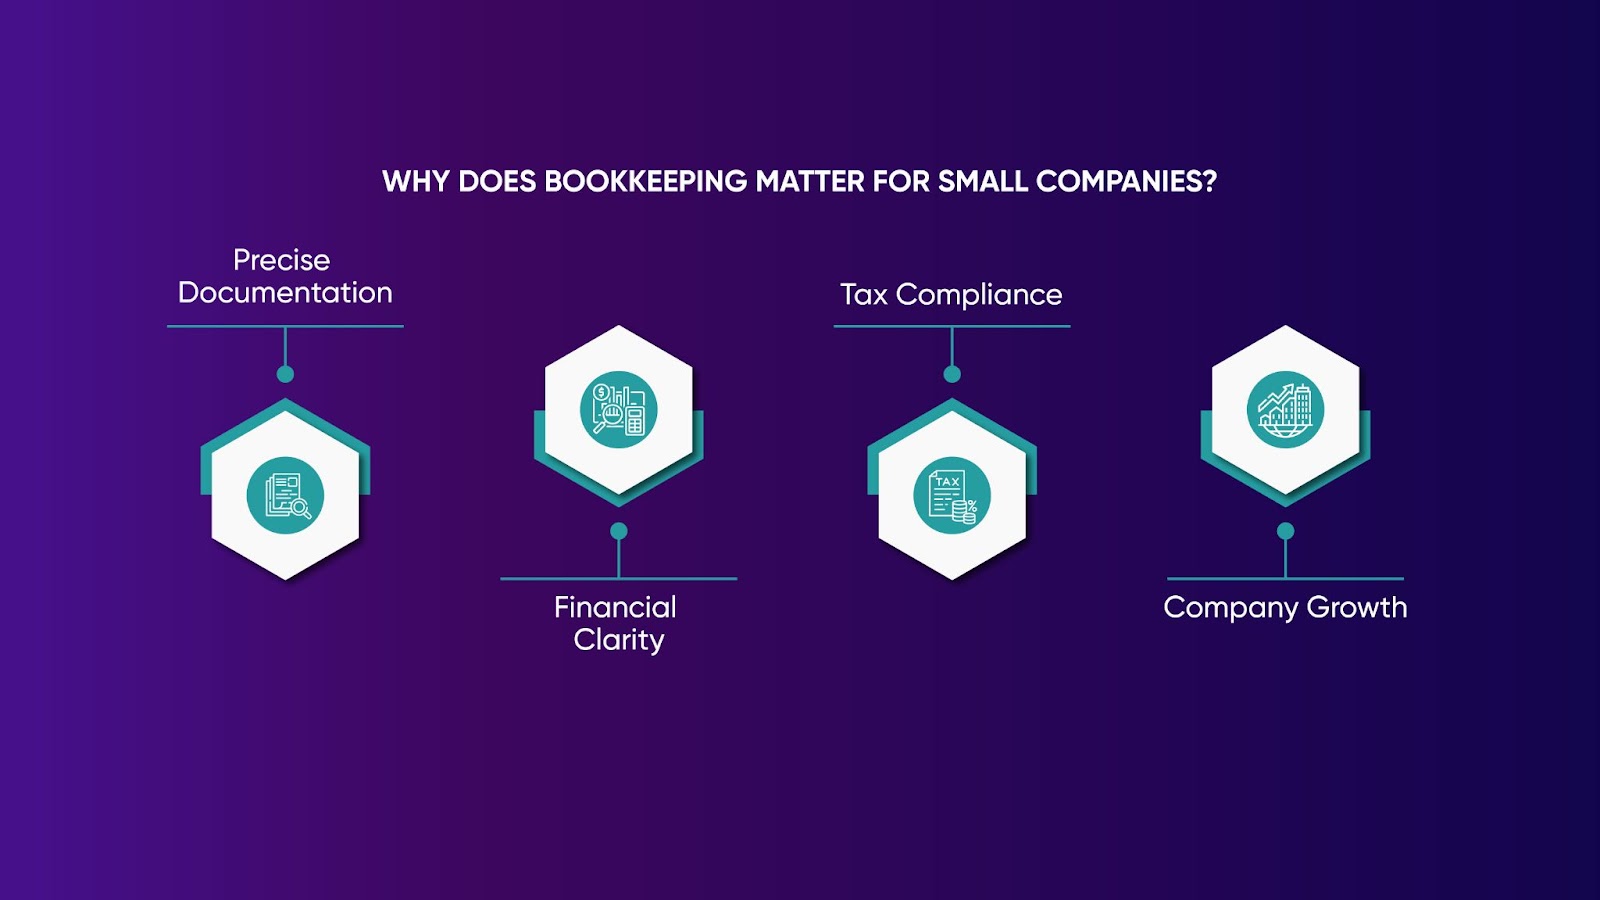 Why Does Bookkeeping Matter for Small Companies?